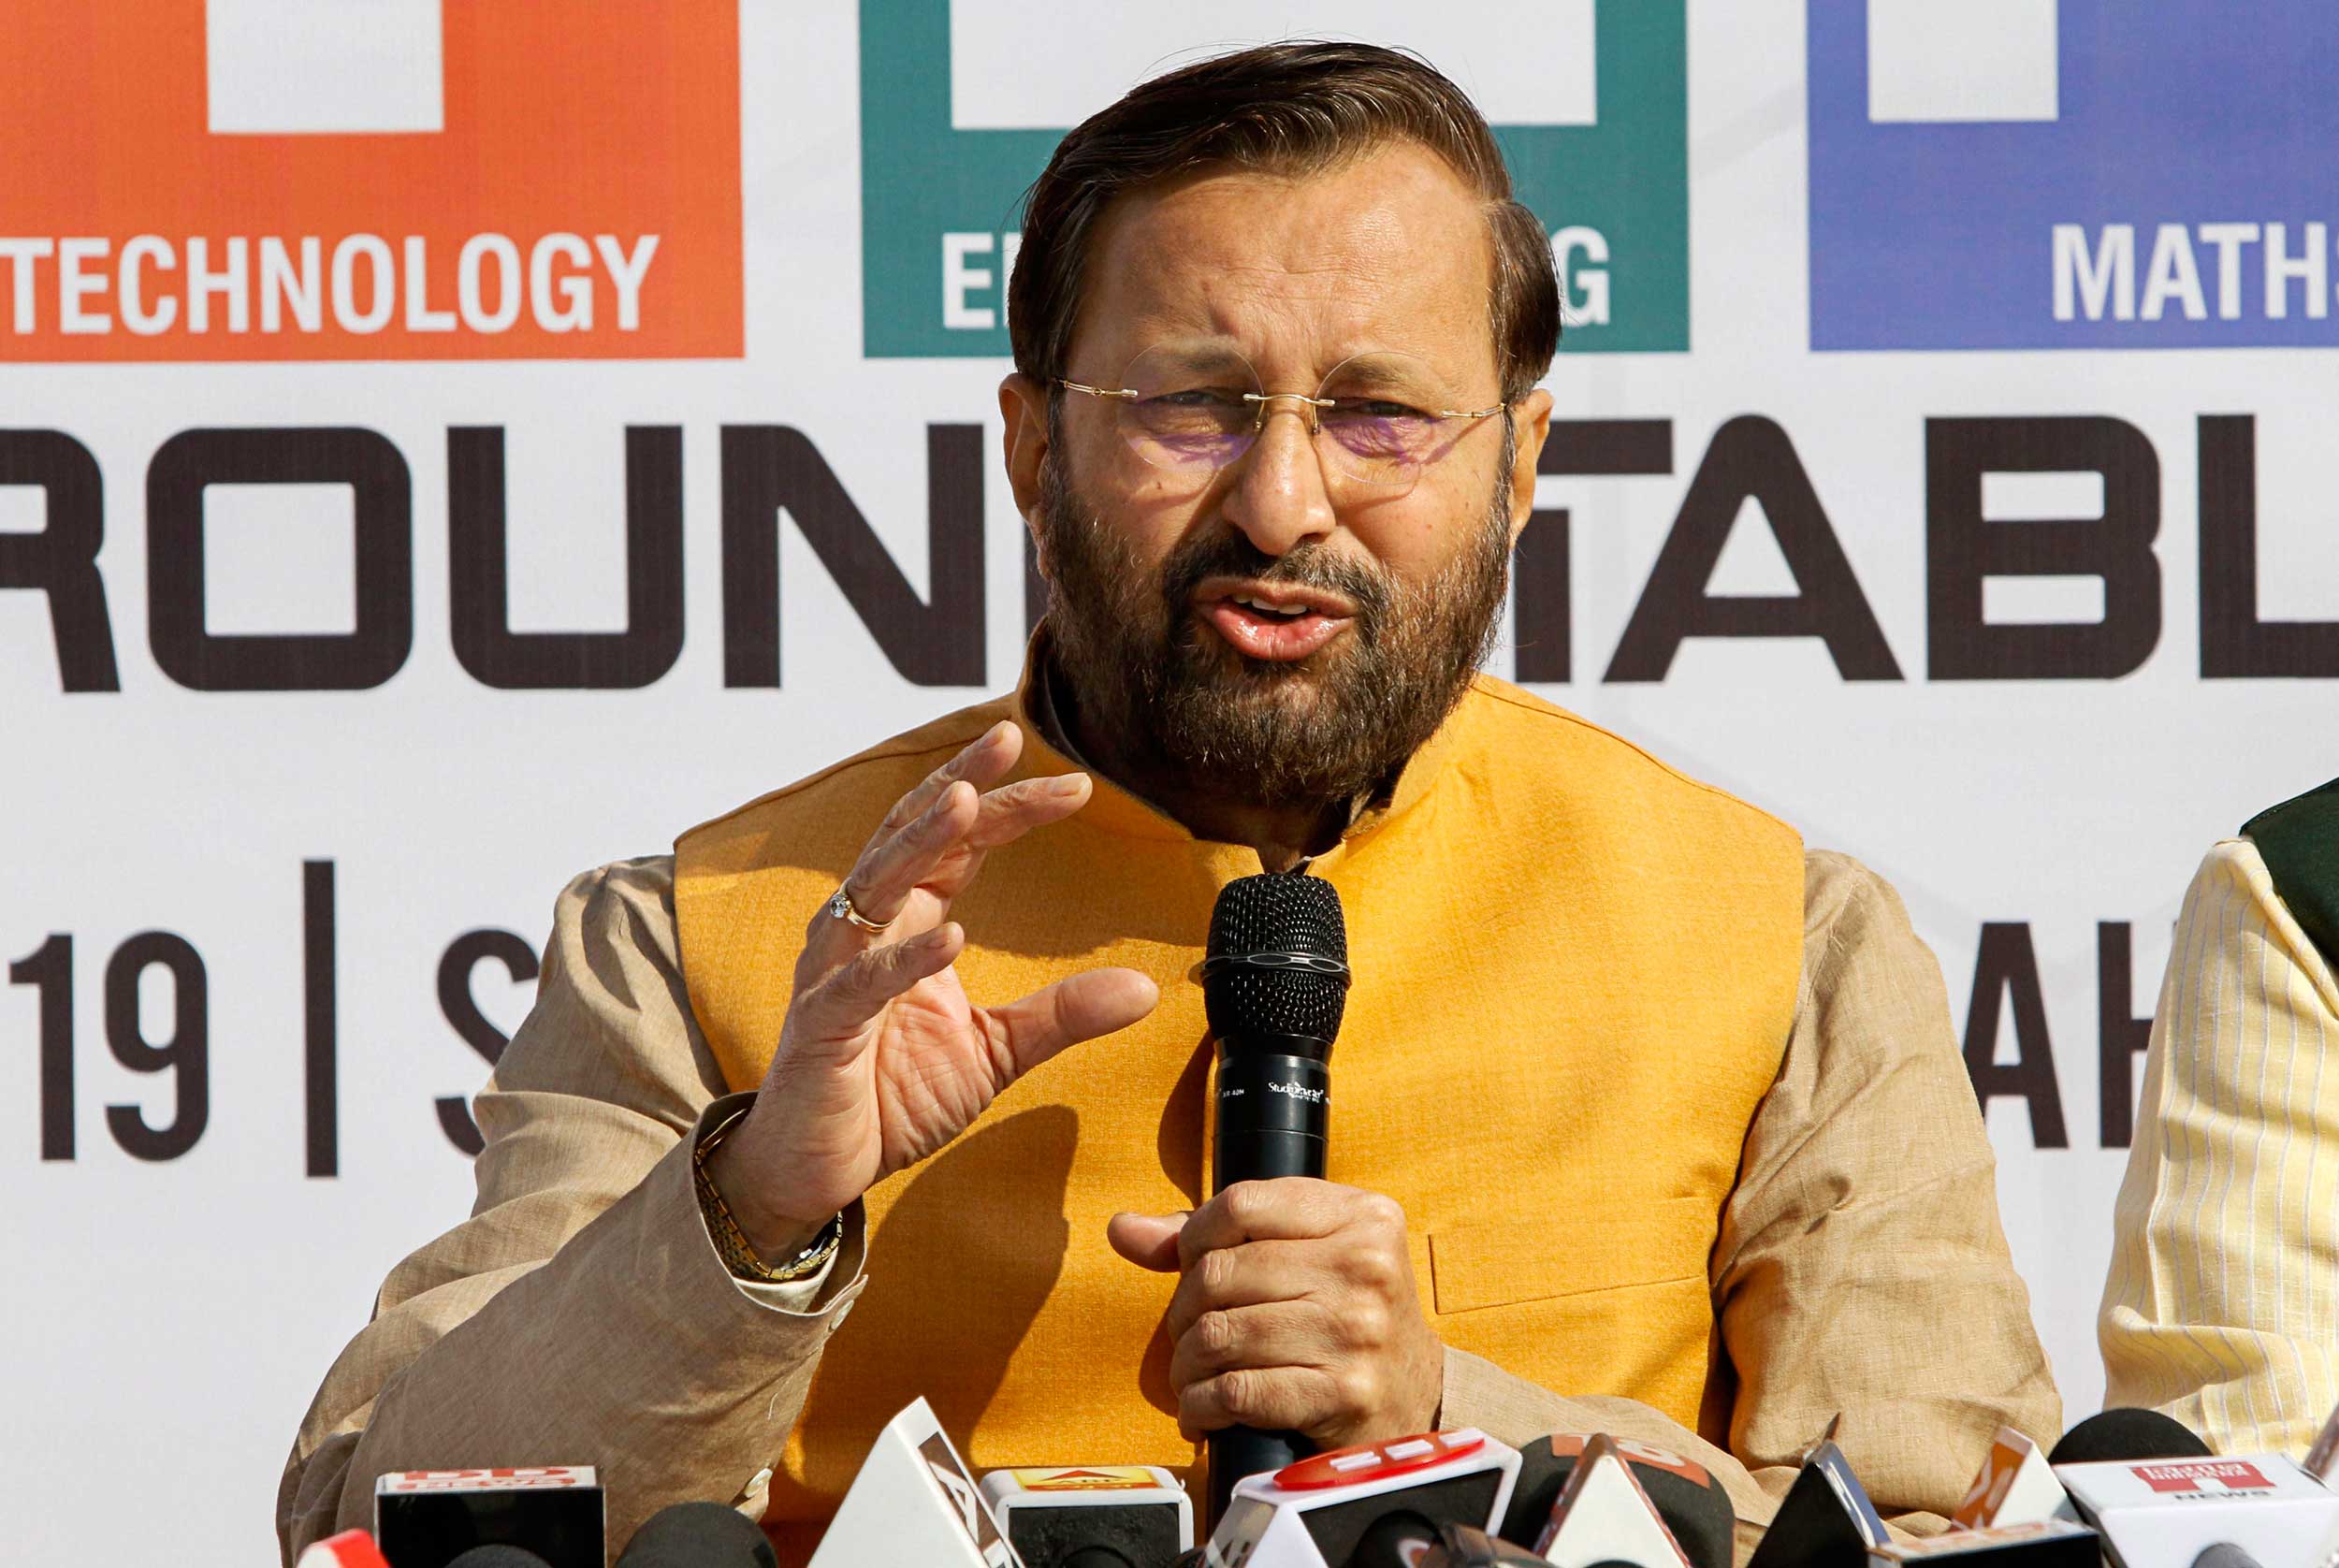 Prakash Javdekar also said that this will ensure safe termination of pregnancies and also give women reproductive rights over their bodies.